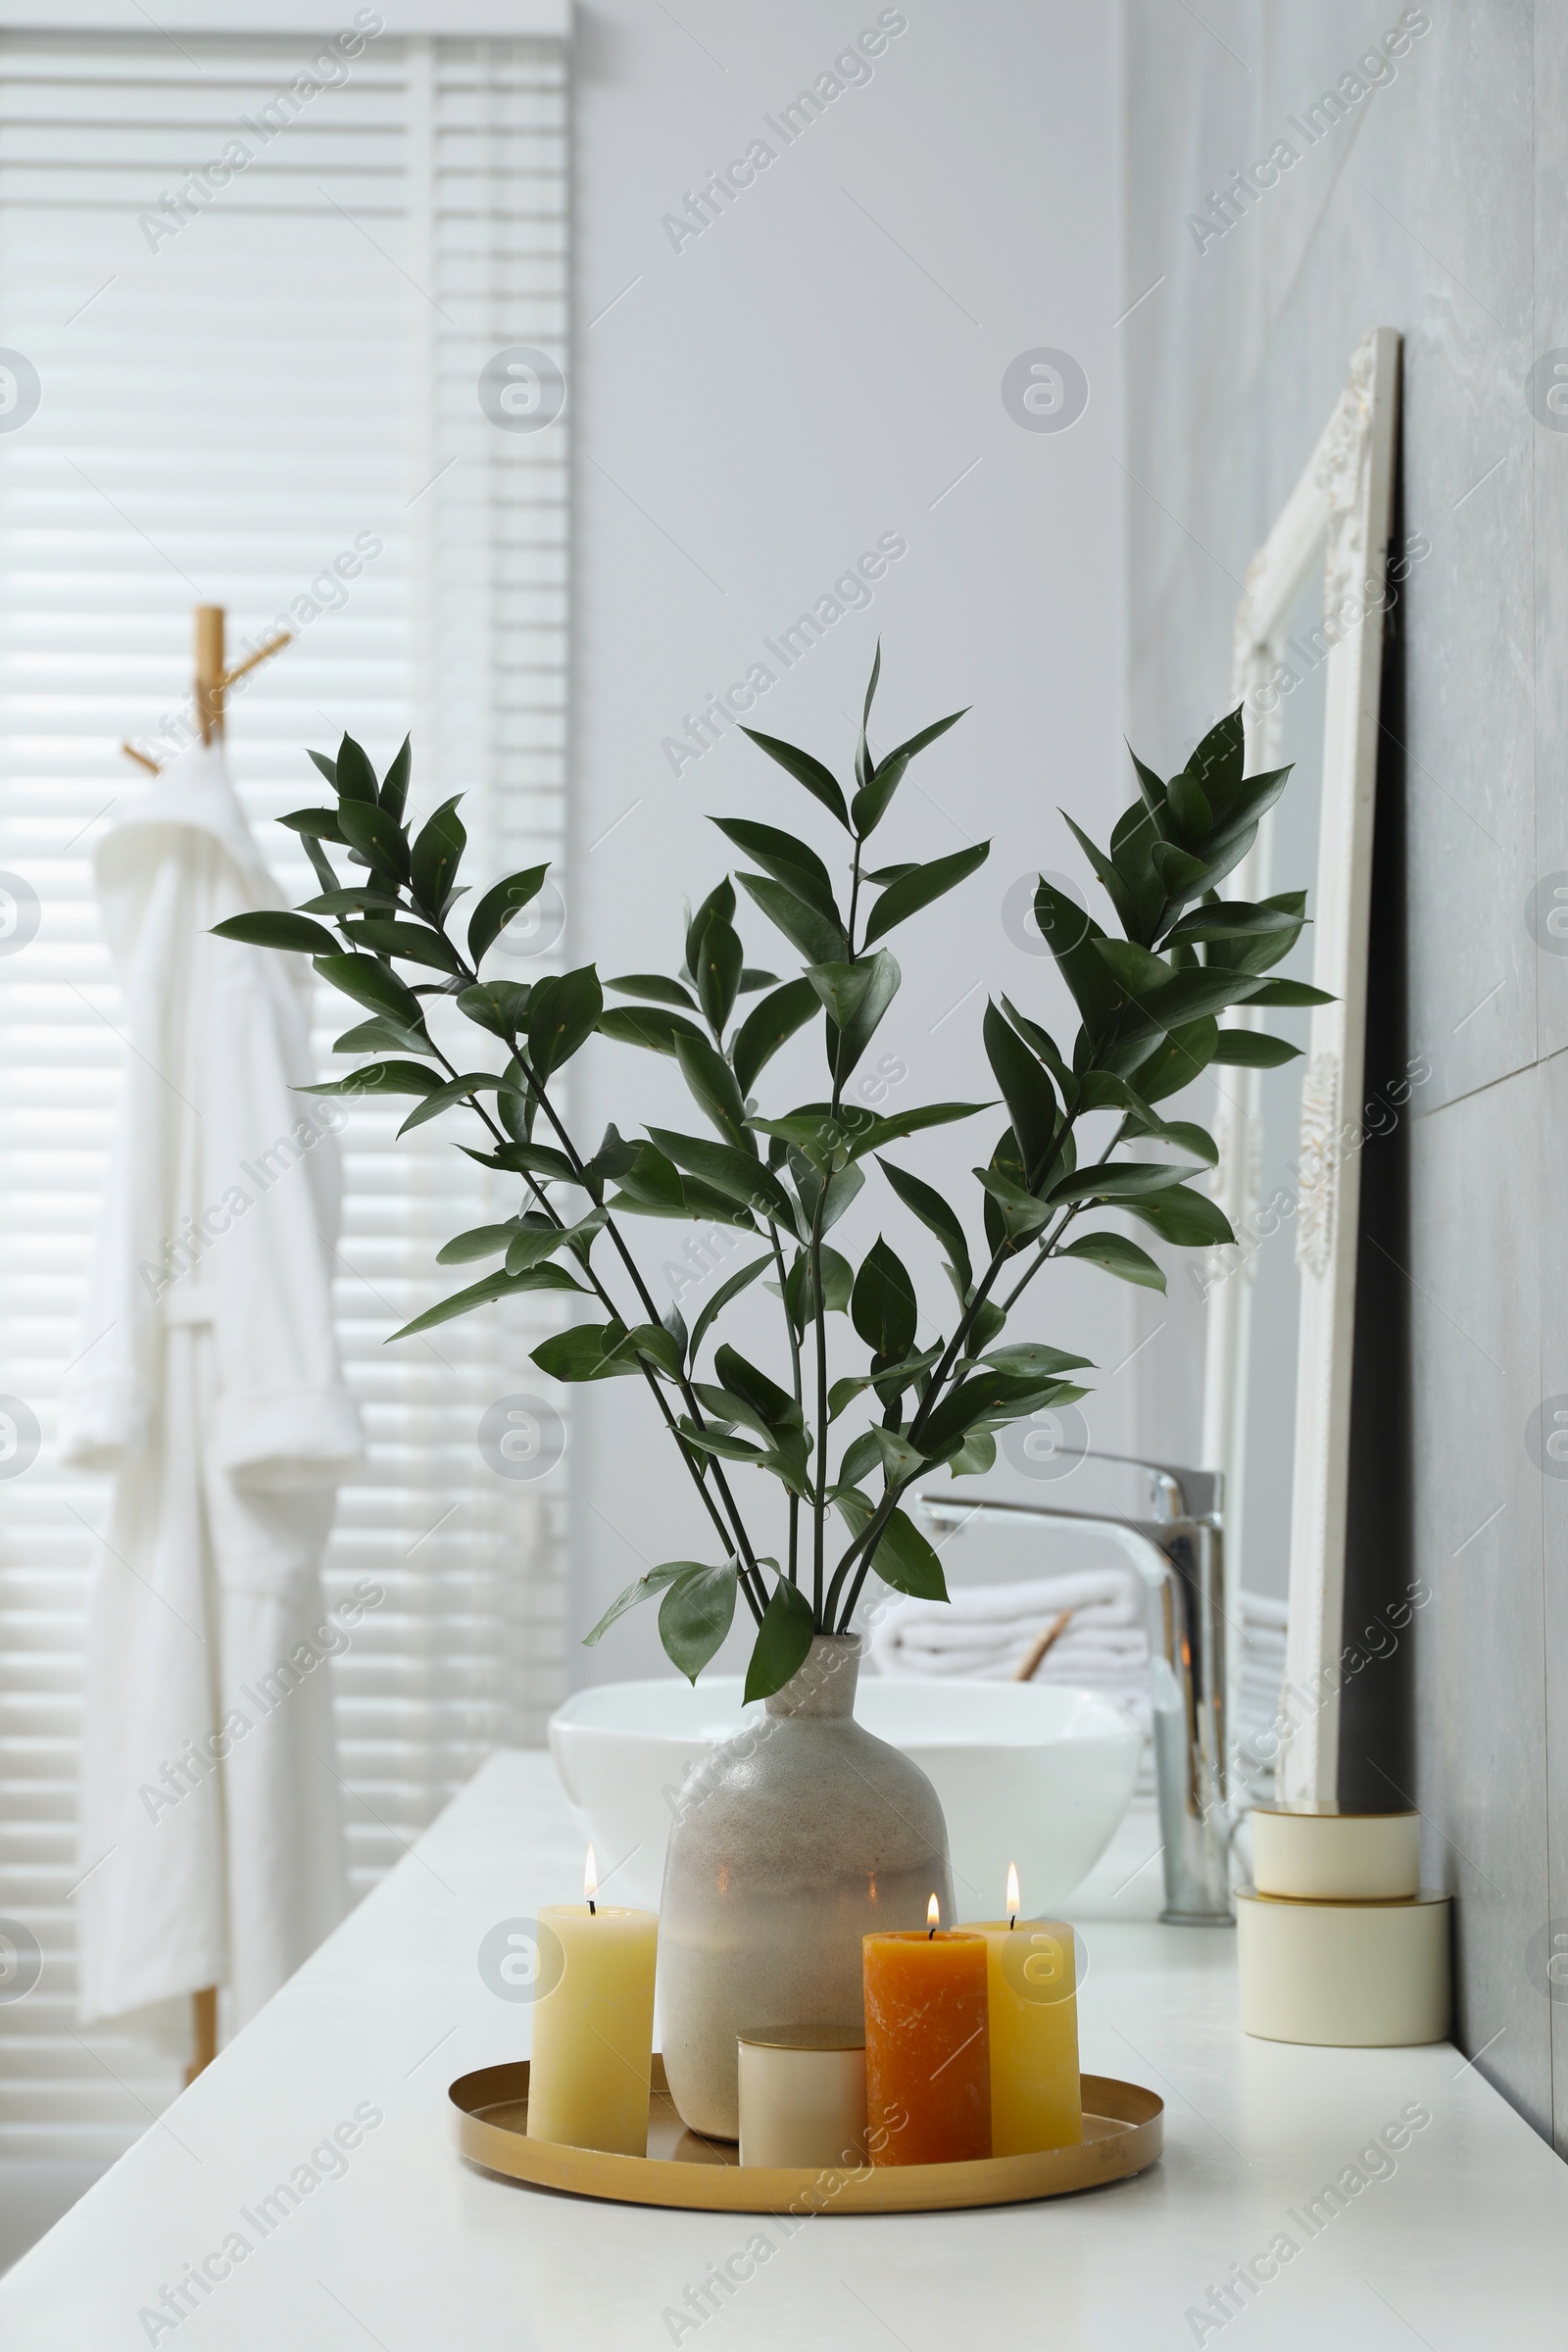 Photo of Beautiful plant in vase and burning candles near vessel sink on bathroom vanity